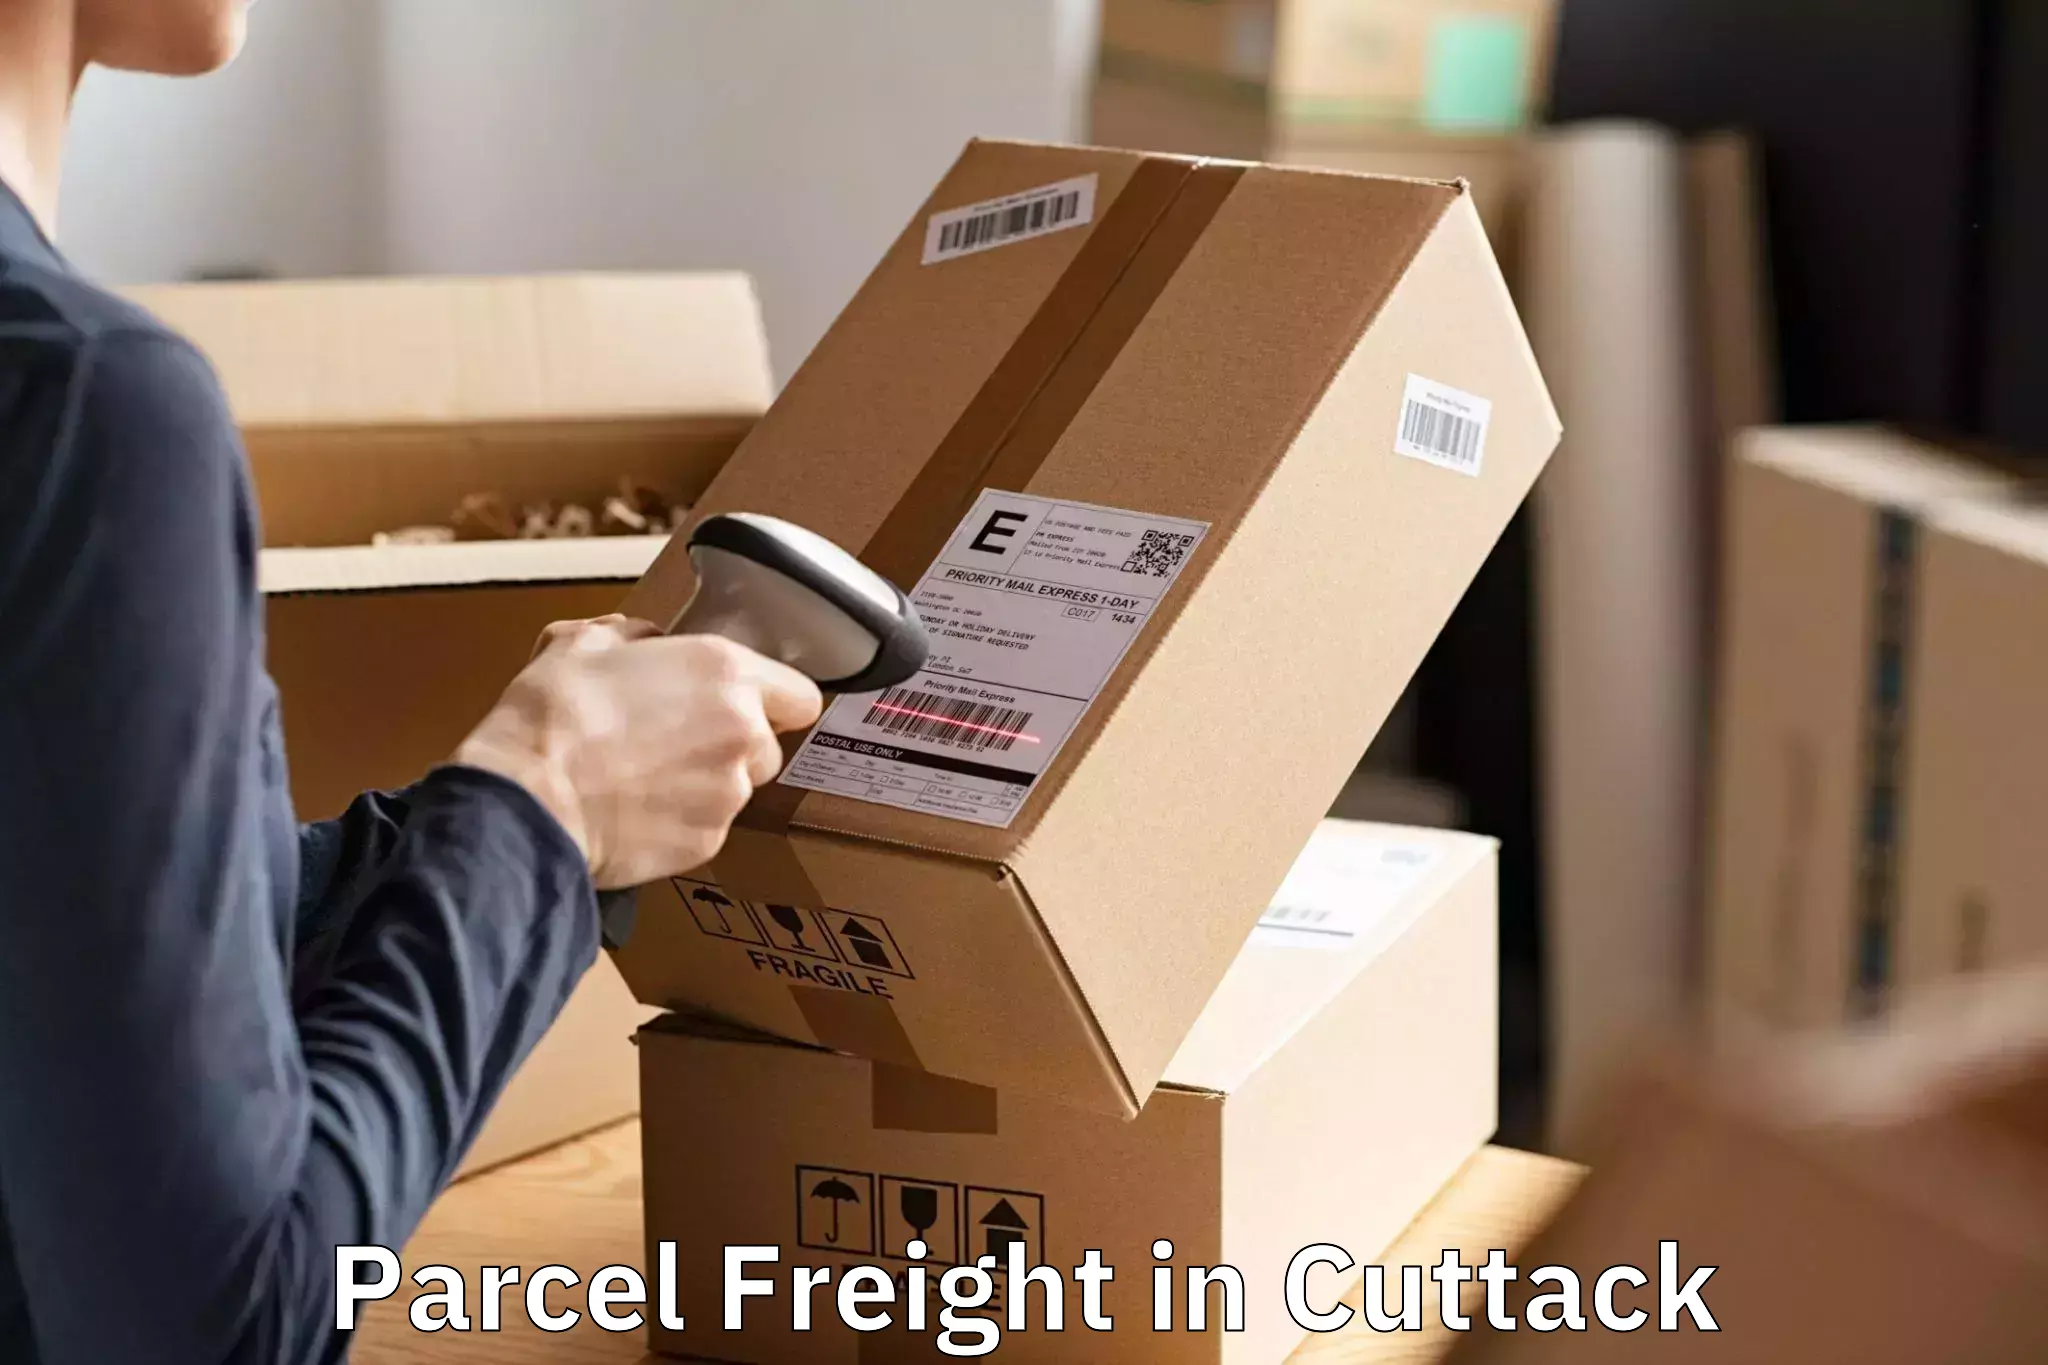 Professional Parcel Freight in Cuttack, Odisha (OR)